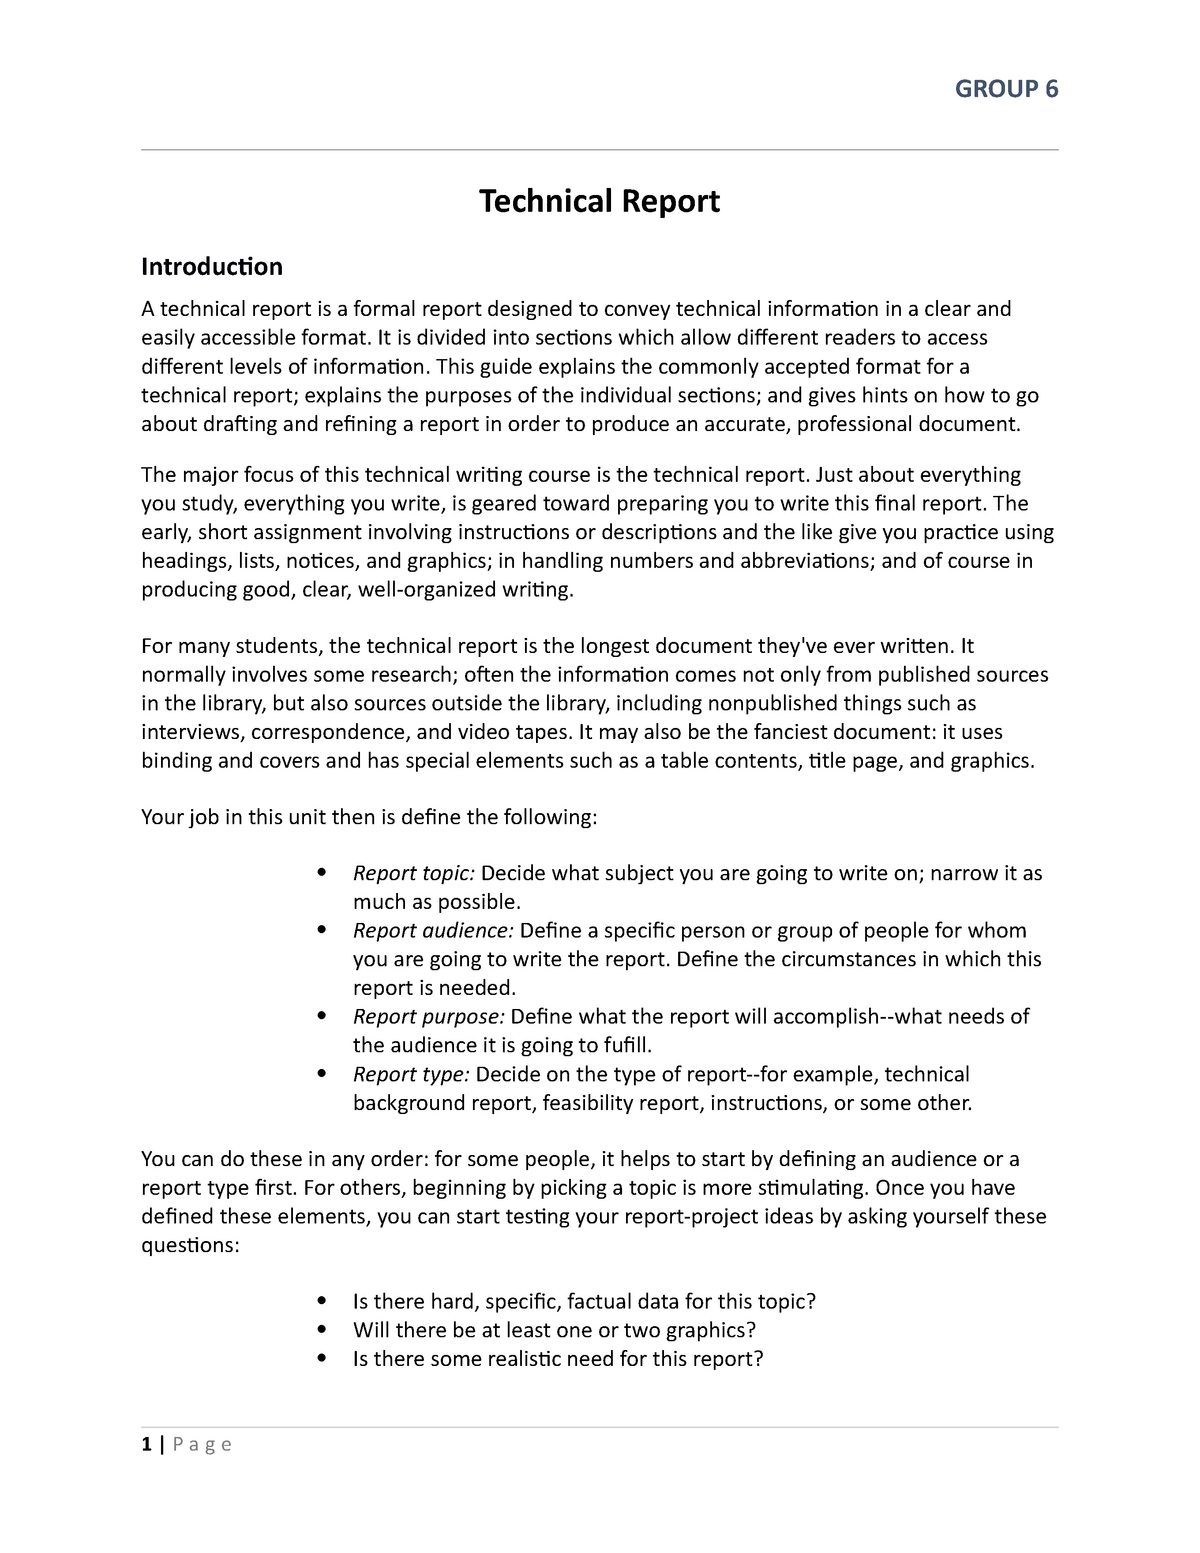 technical report writing 1 for criminology students